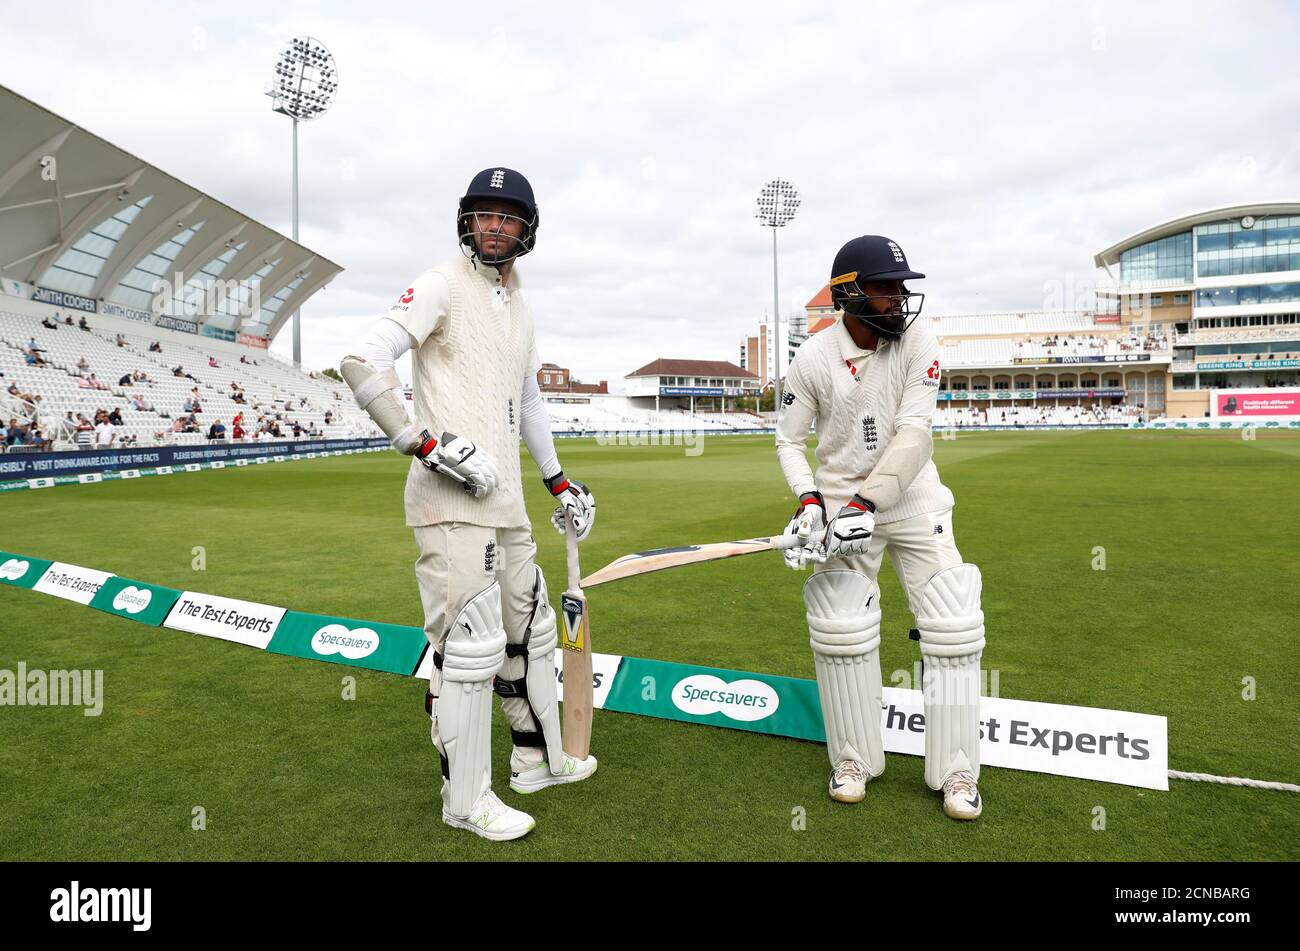 England India Test Cricket High Resolution Stock Photography And Images Page 9 Alamy